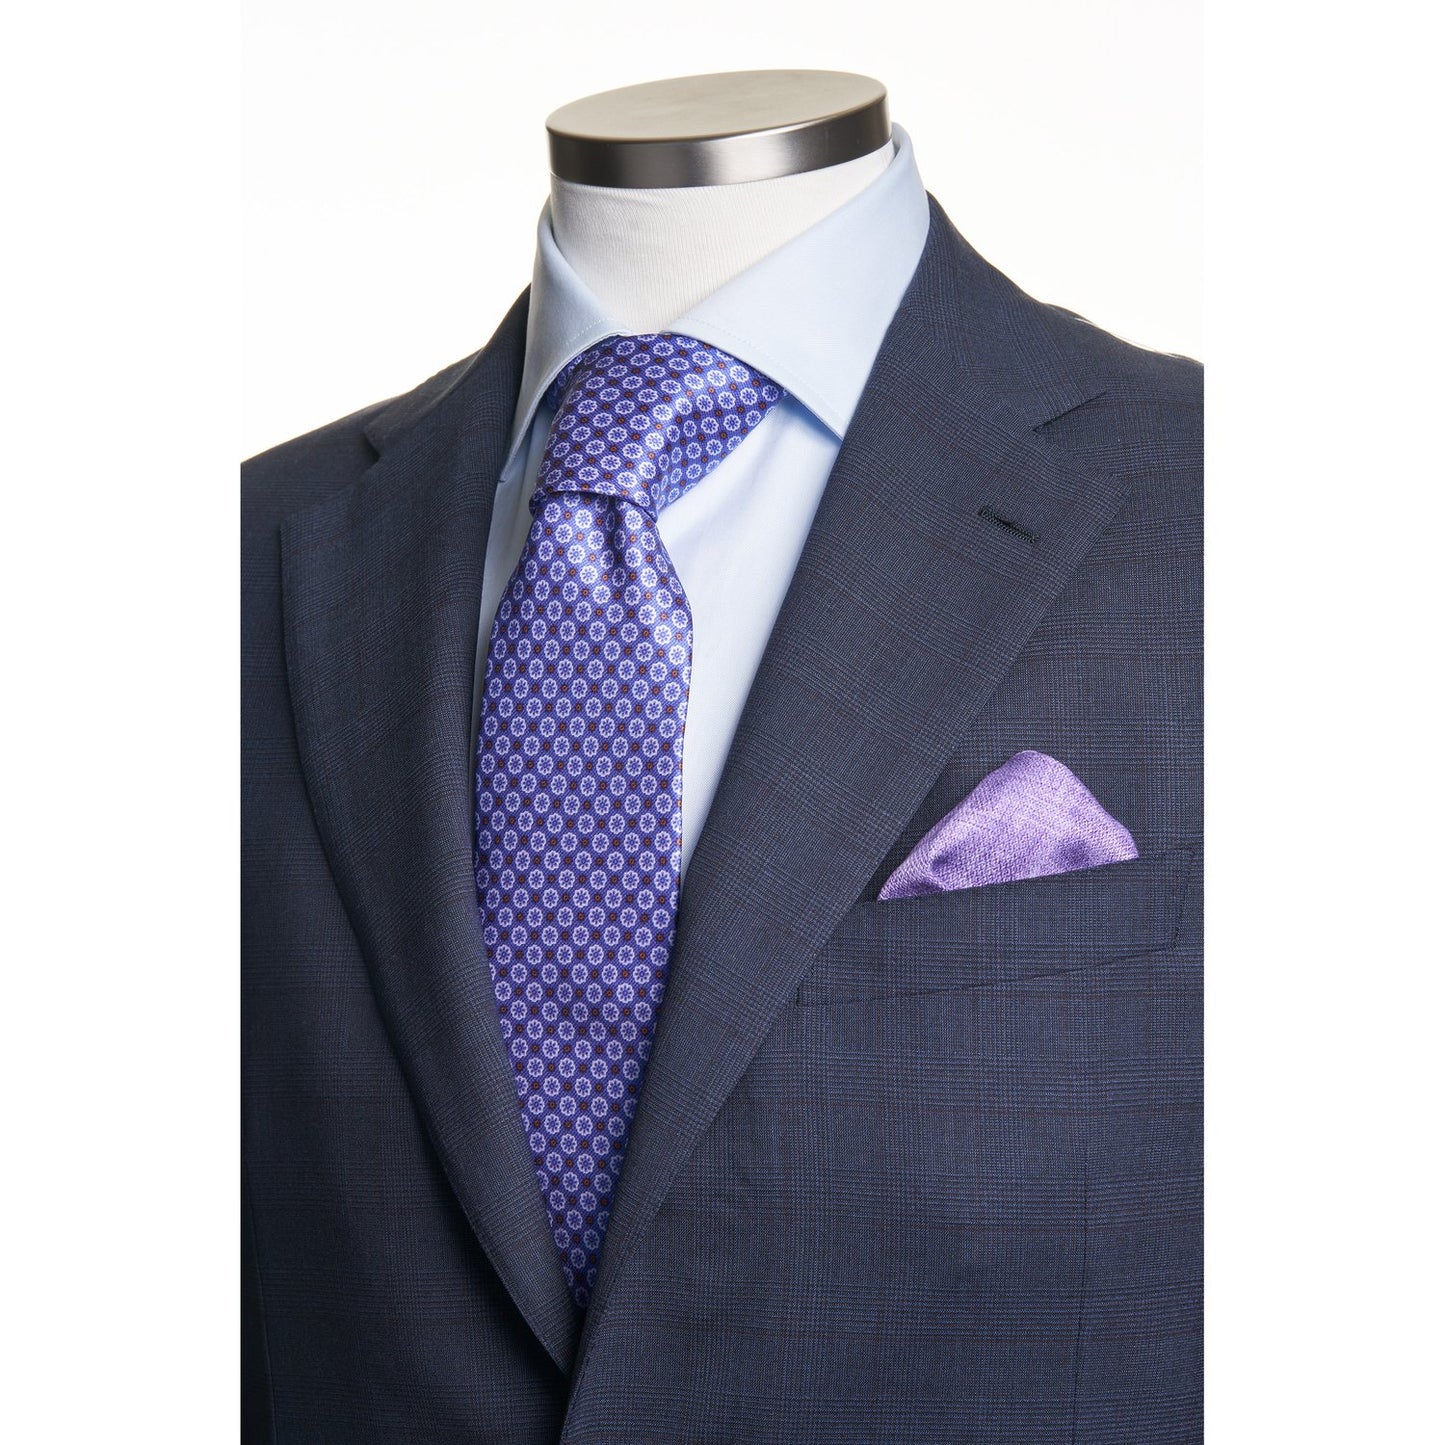 Belvest Super 130 Wool Suit in Super Blue and Maroon Prince of Wales Pattern